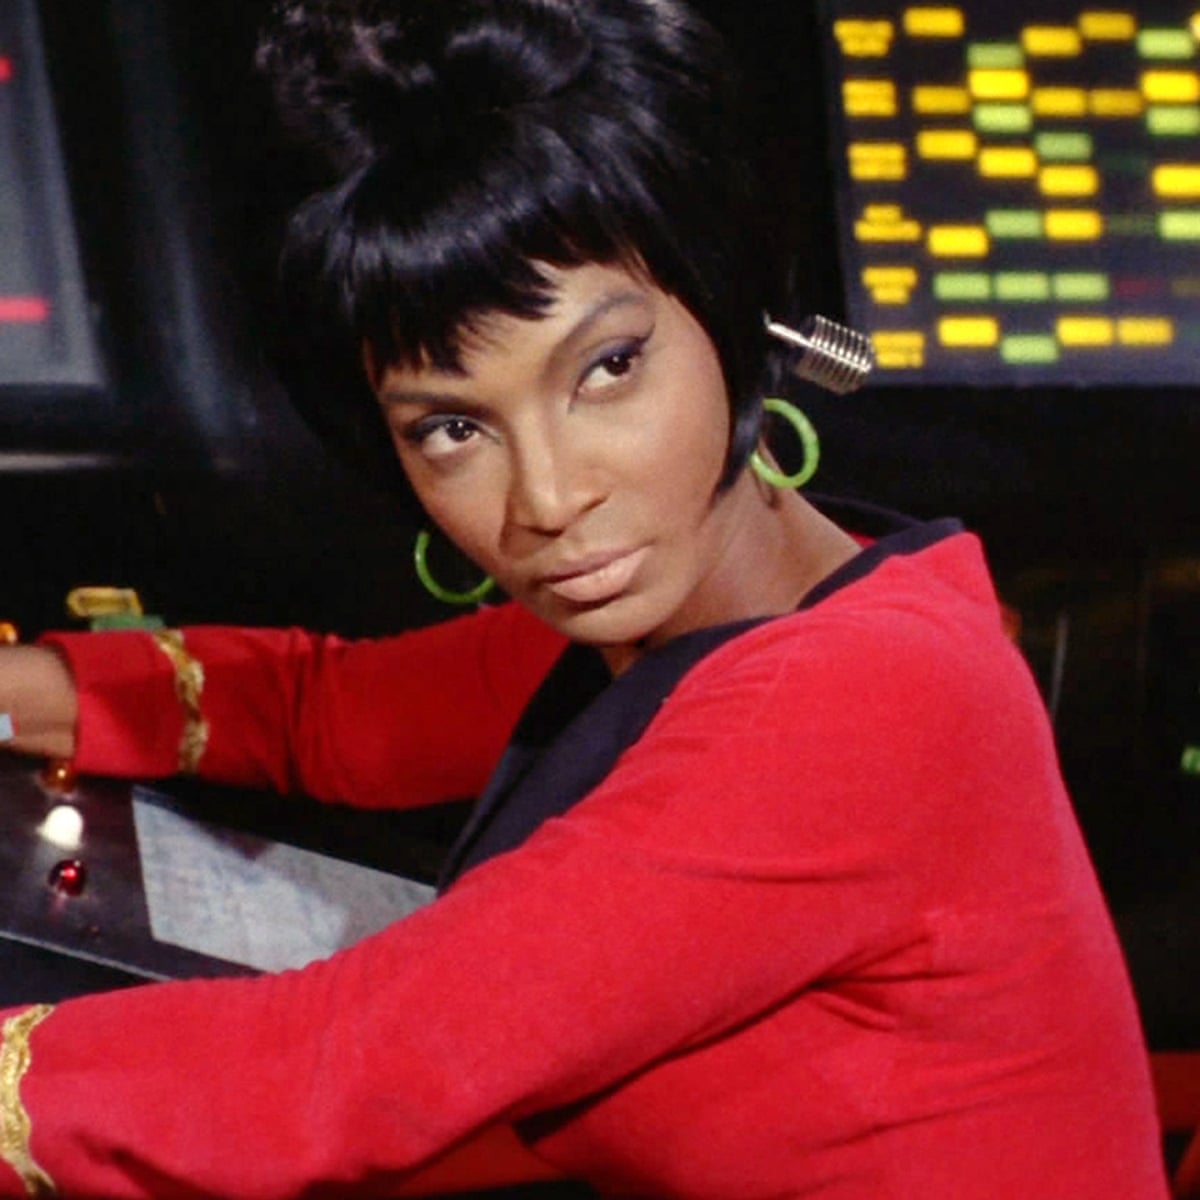 Free Nichelle': protesters want to liberate Star Trek actor Nichelle Nichols  from conservatorship | Ageing | The Guardian